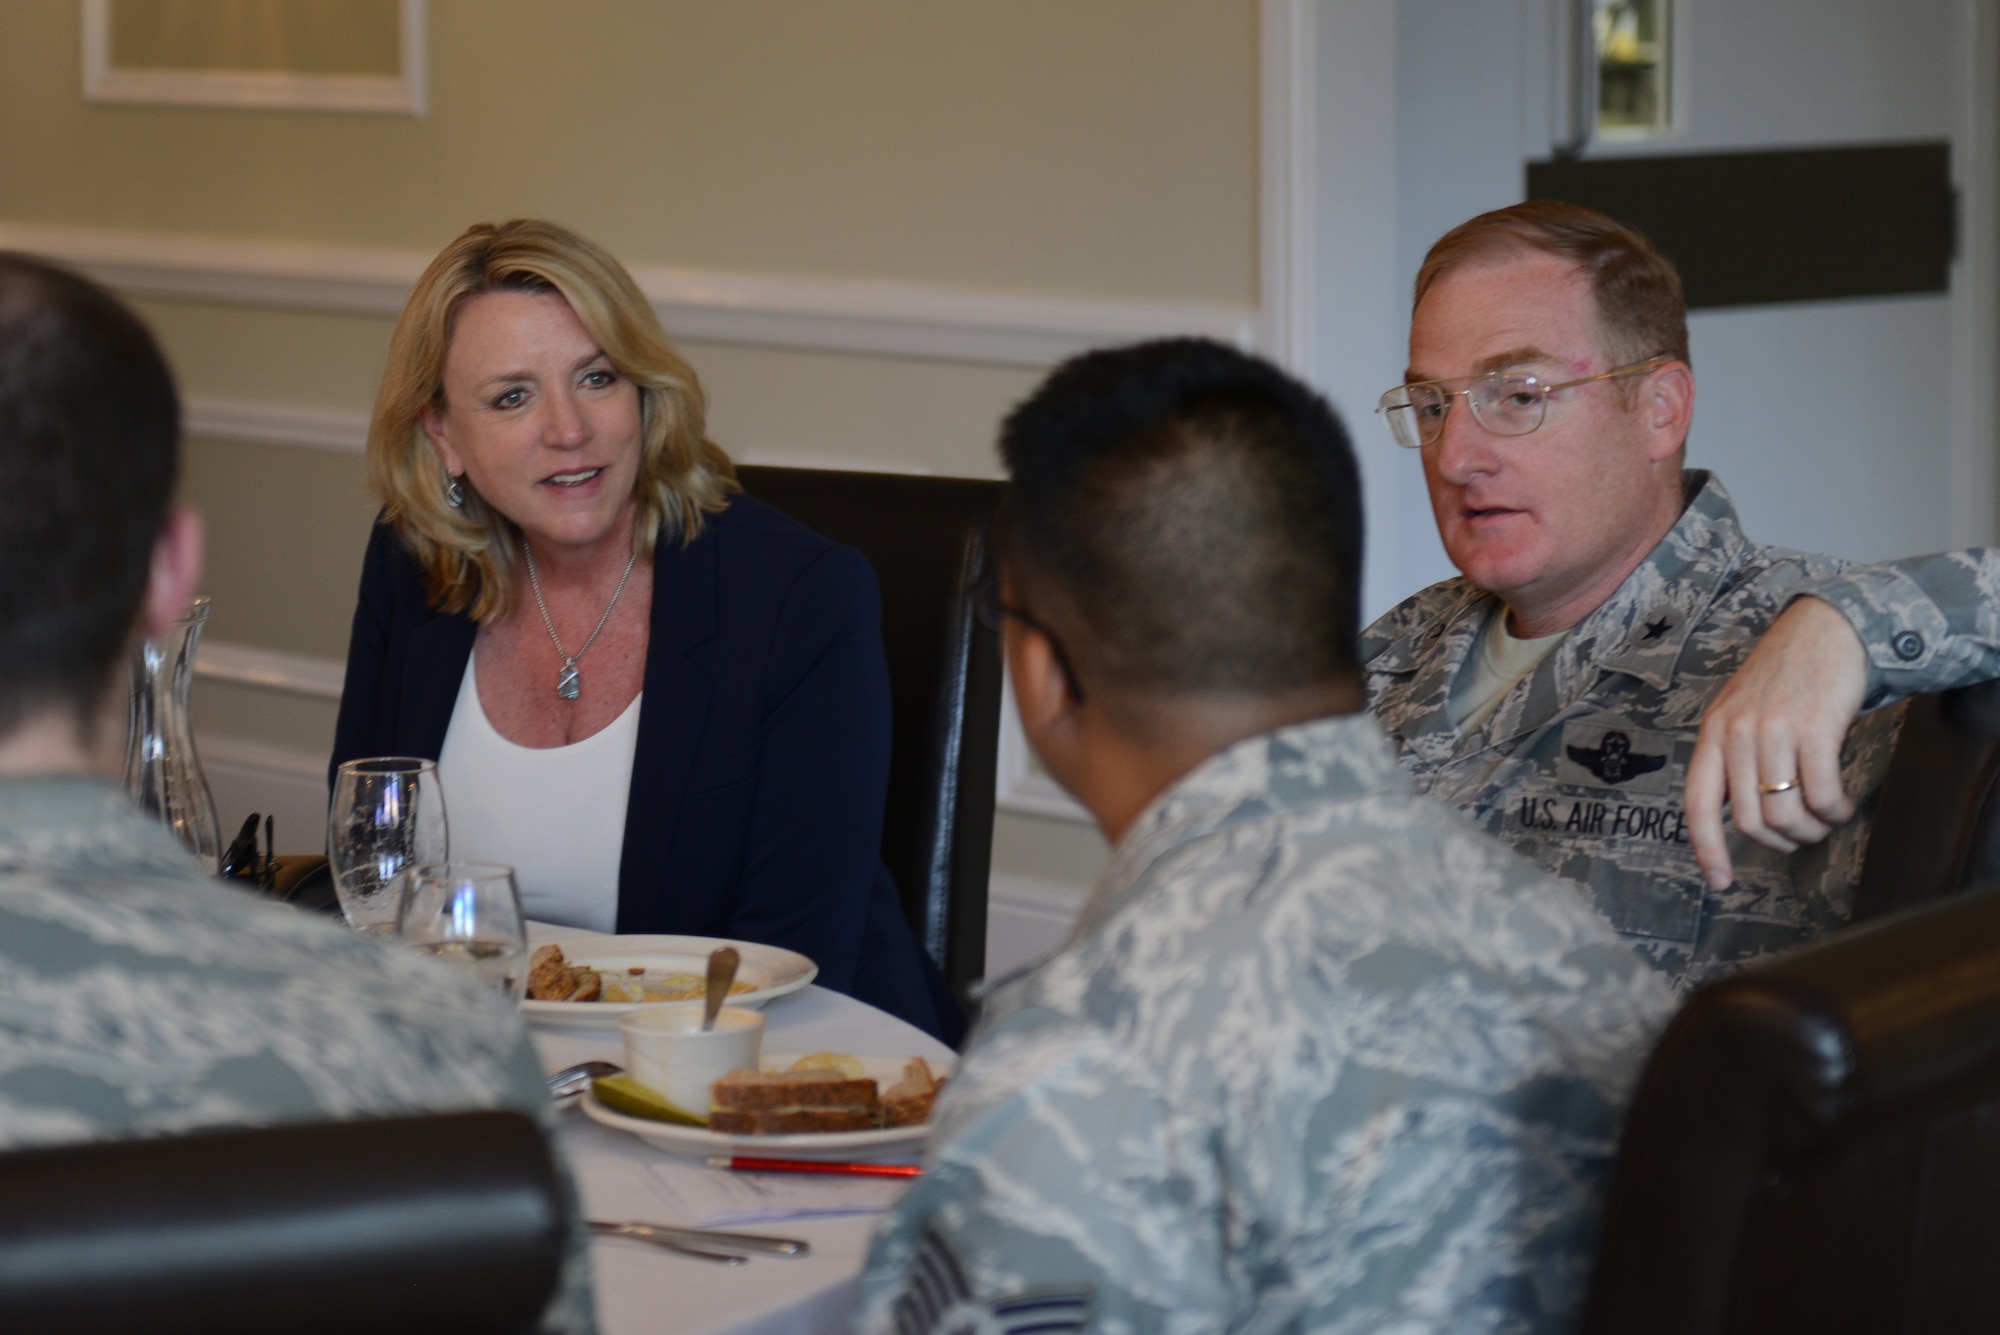 Secretary of the Air Force Deborah Lee James and Brig. Gen. Douglas Cox speak with Airmen from the 501st Combat Support Wing at lunch July 17, 2014, during a visit to Royal Air Force Alconbury, England. More than fifty Airmen had the chance to sit and speak with James during lunch, explaining their parts of the mission of the 501st CSW. Cox is the director of U.S. Air Forces in Europe-United Kingdom. (U.S. Air Force photo/Tech. Sgt. Chrissy Best)